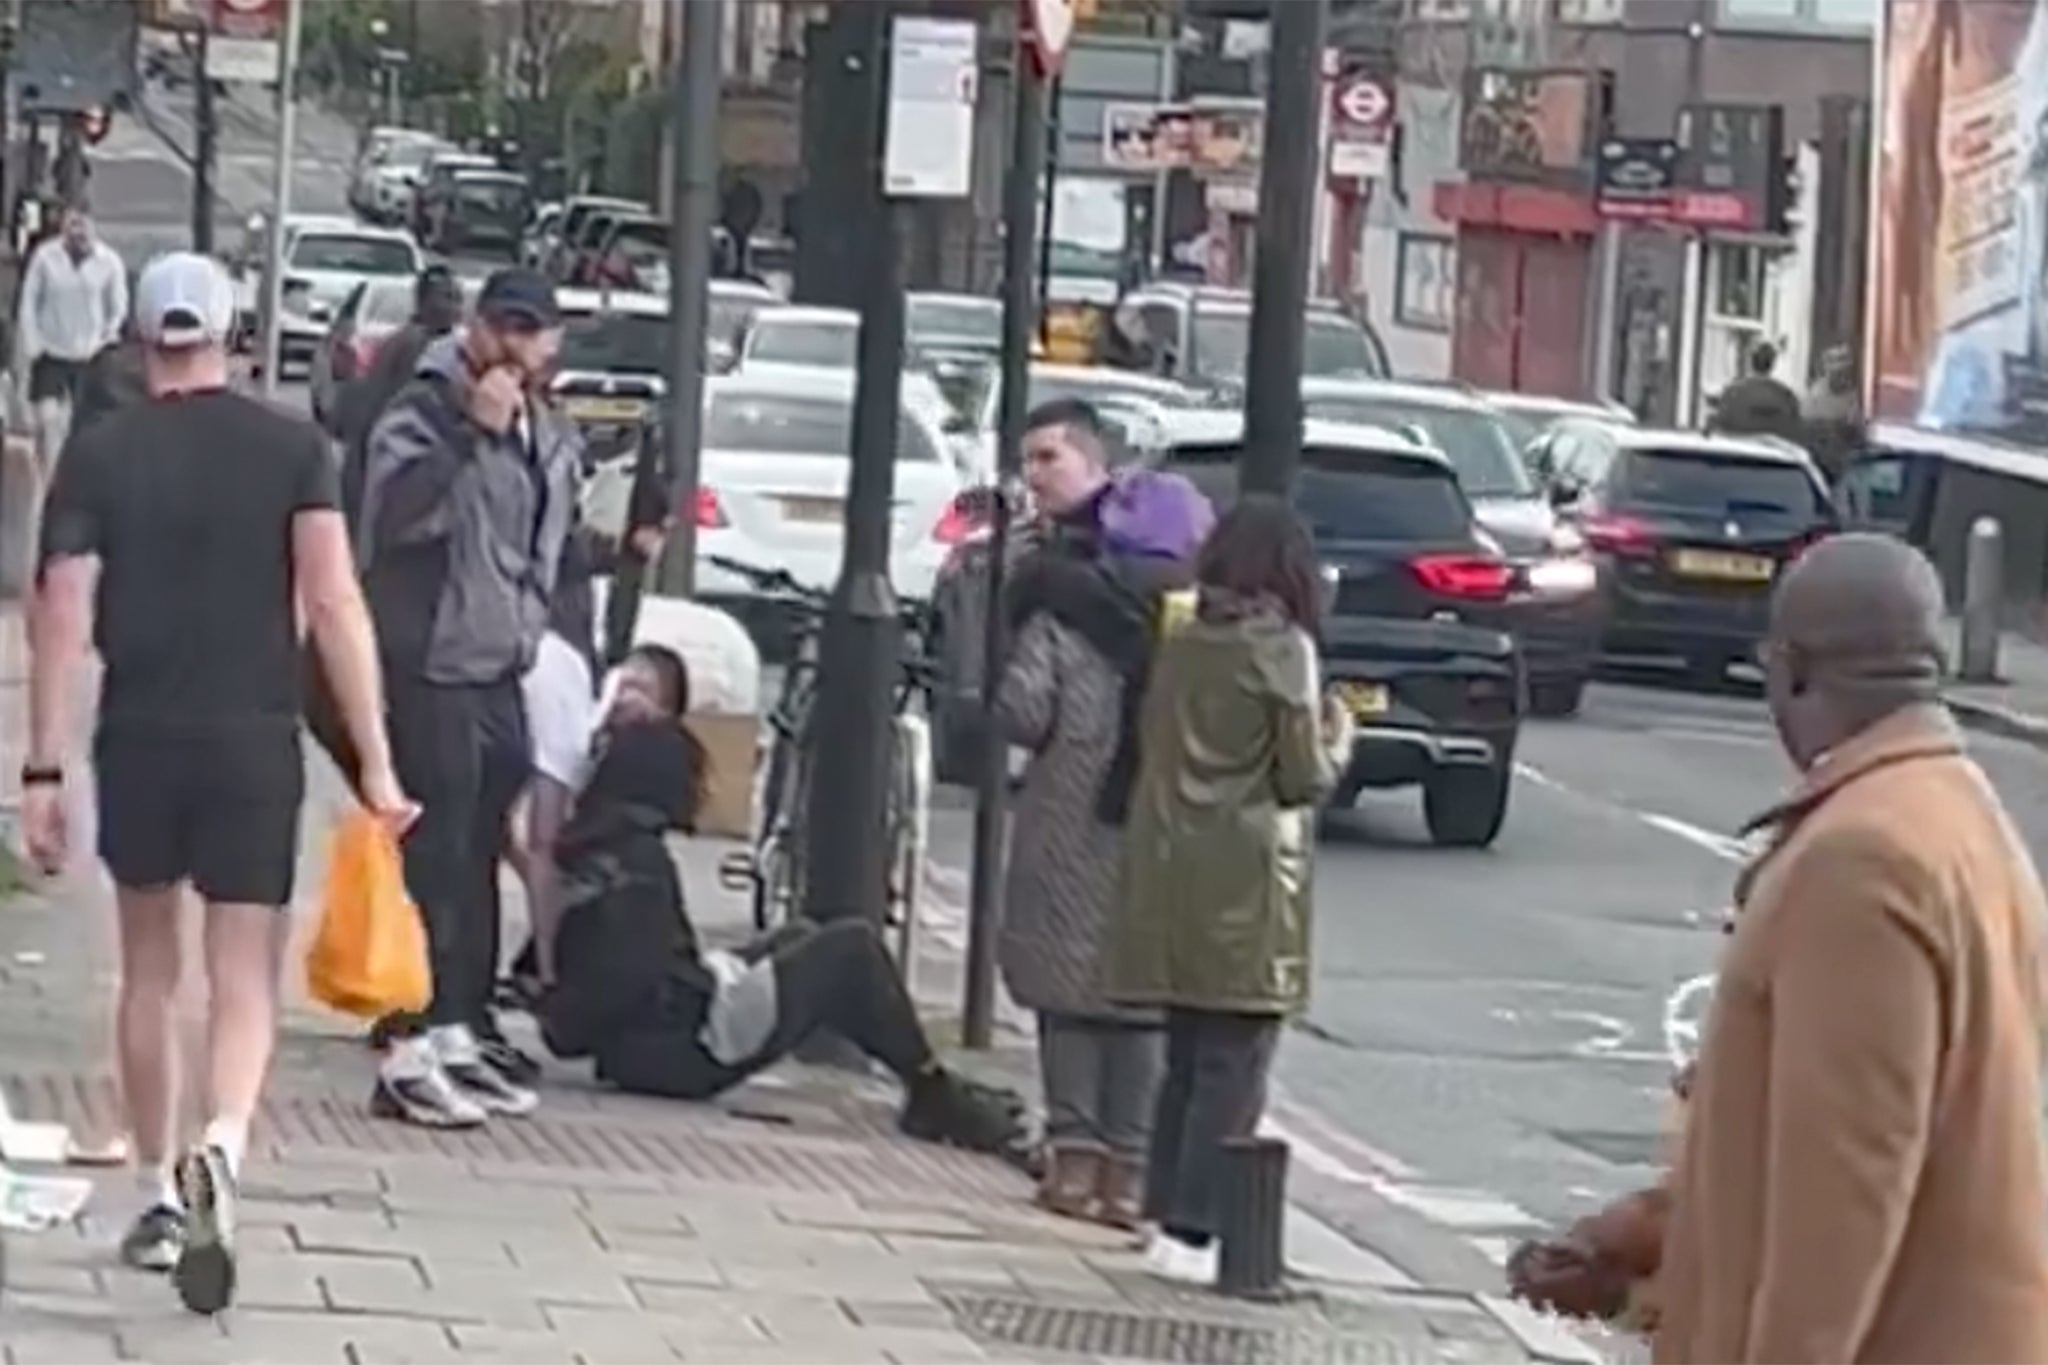 Footage on social media showed the suspect sitting on the floor and handcuffed outside Clapham North station